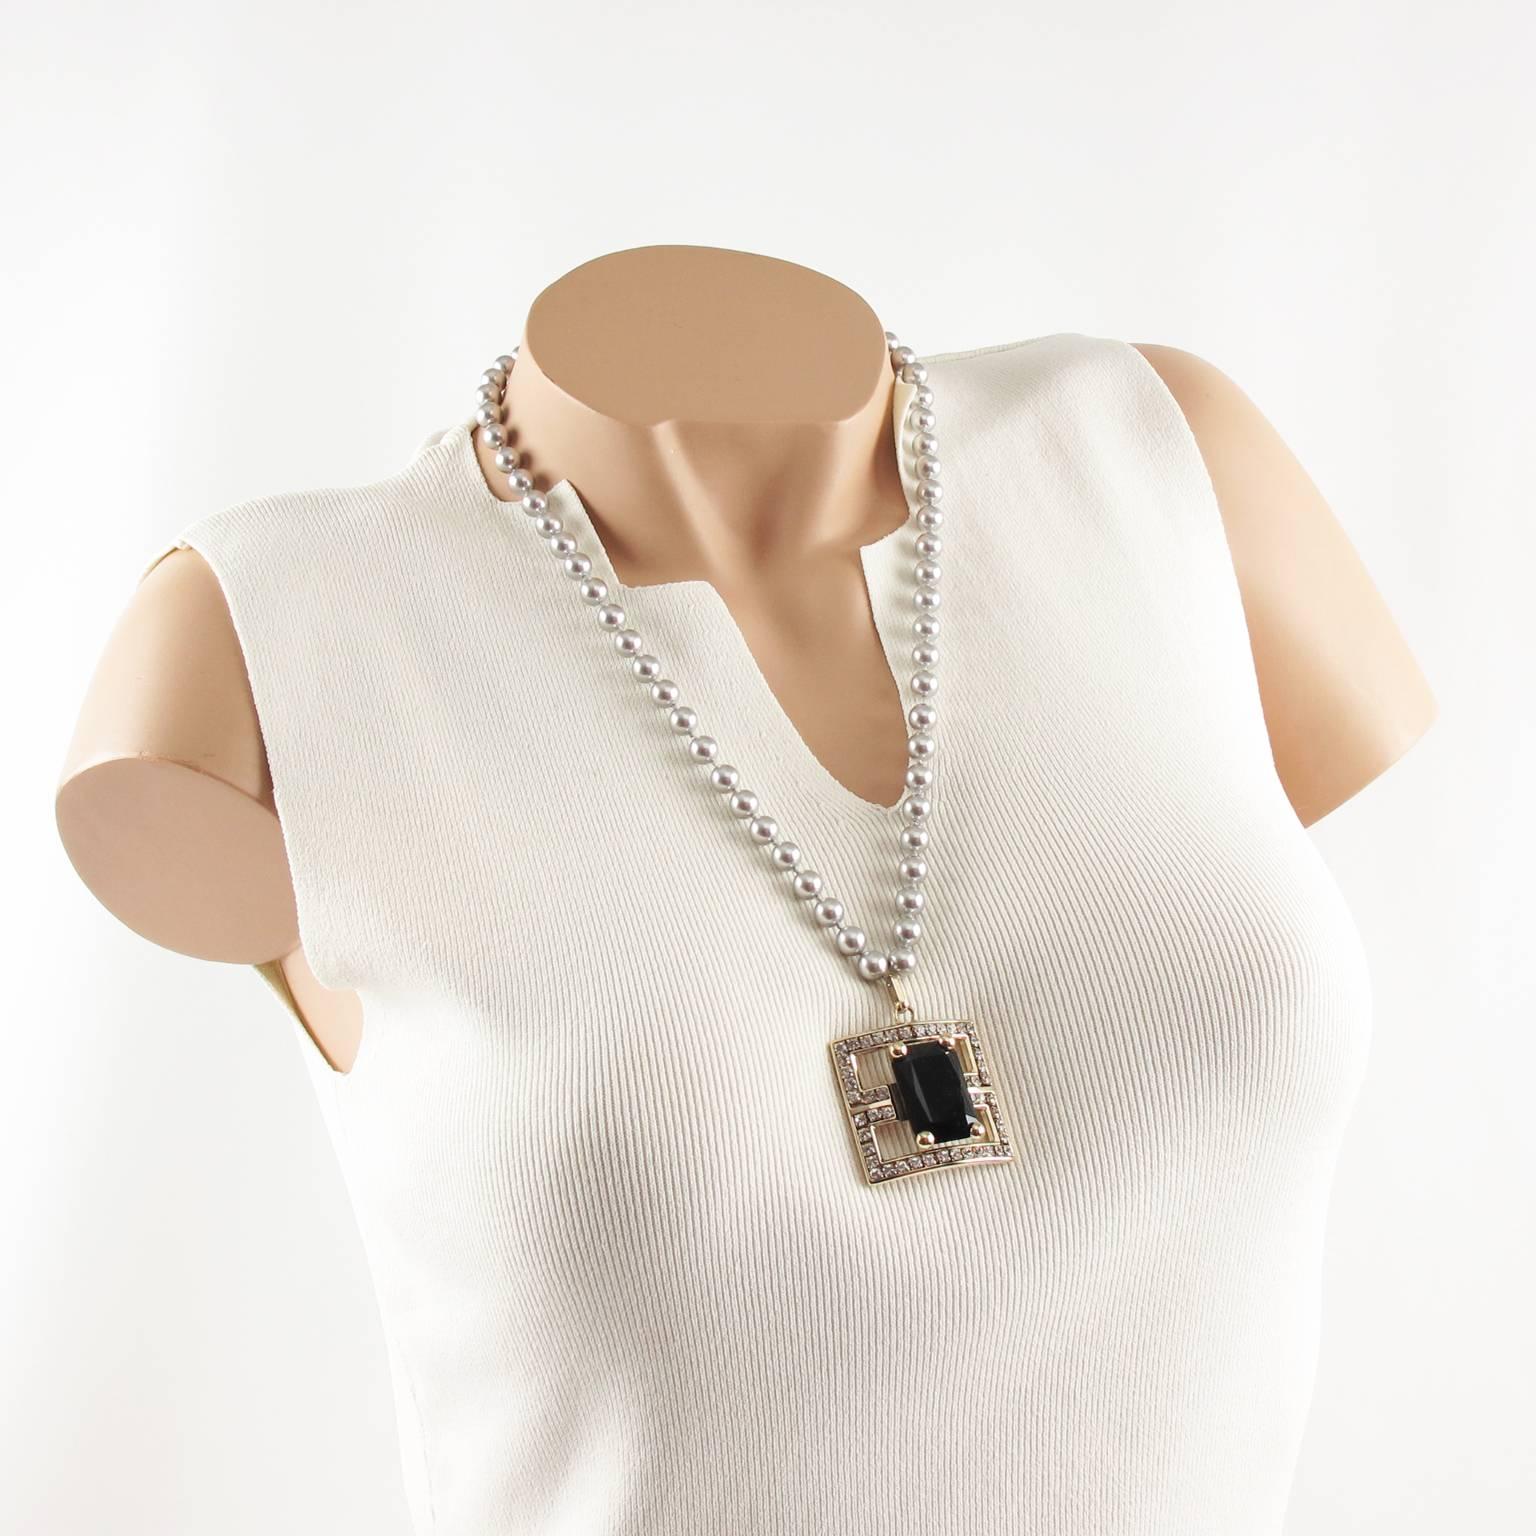 Stunning Valentino Garavani couture necklace. Long one strand of pearl-like beads compliment with geometric pendant medallion covered with rhinestones. The faux pearls have a lovely shimmery gray color. Central pendant is made of silvered metal